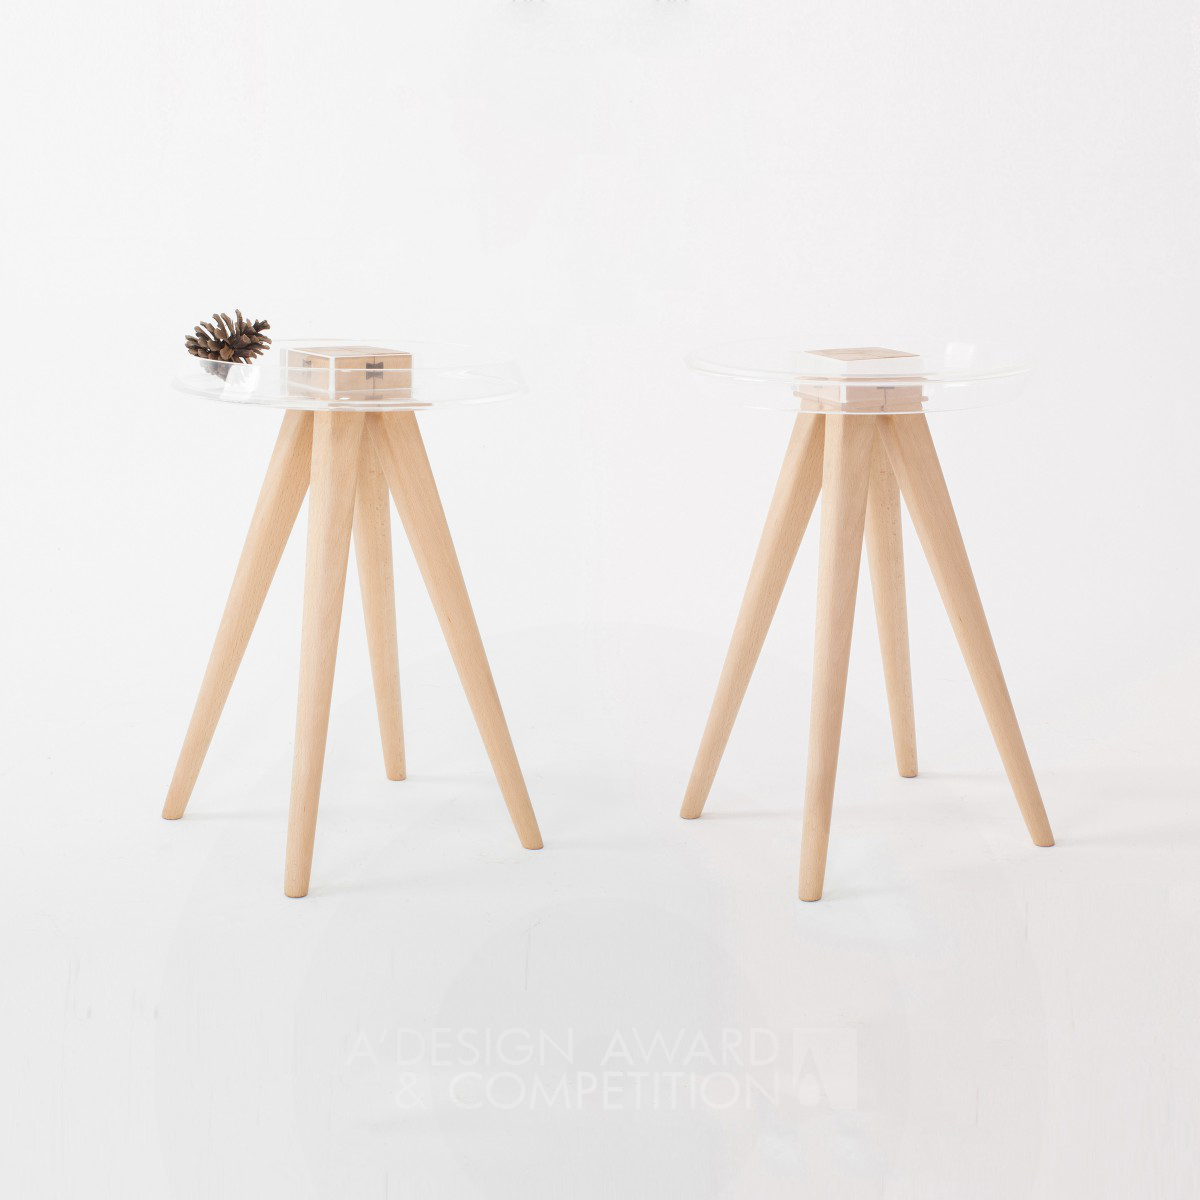 Square and Round <b>A Multifunctional Stool